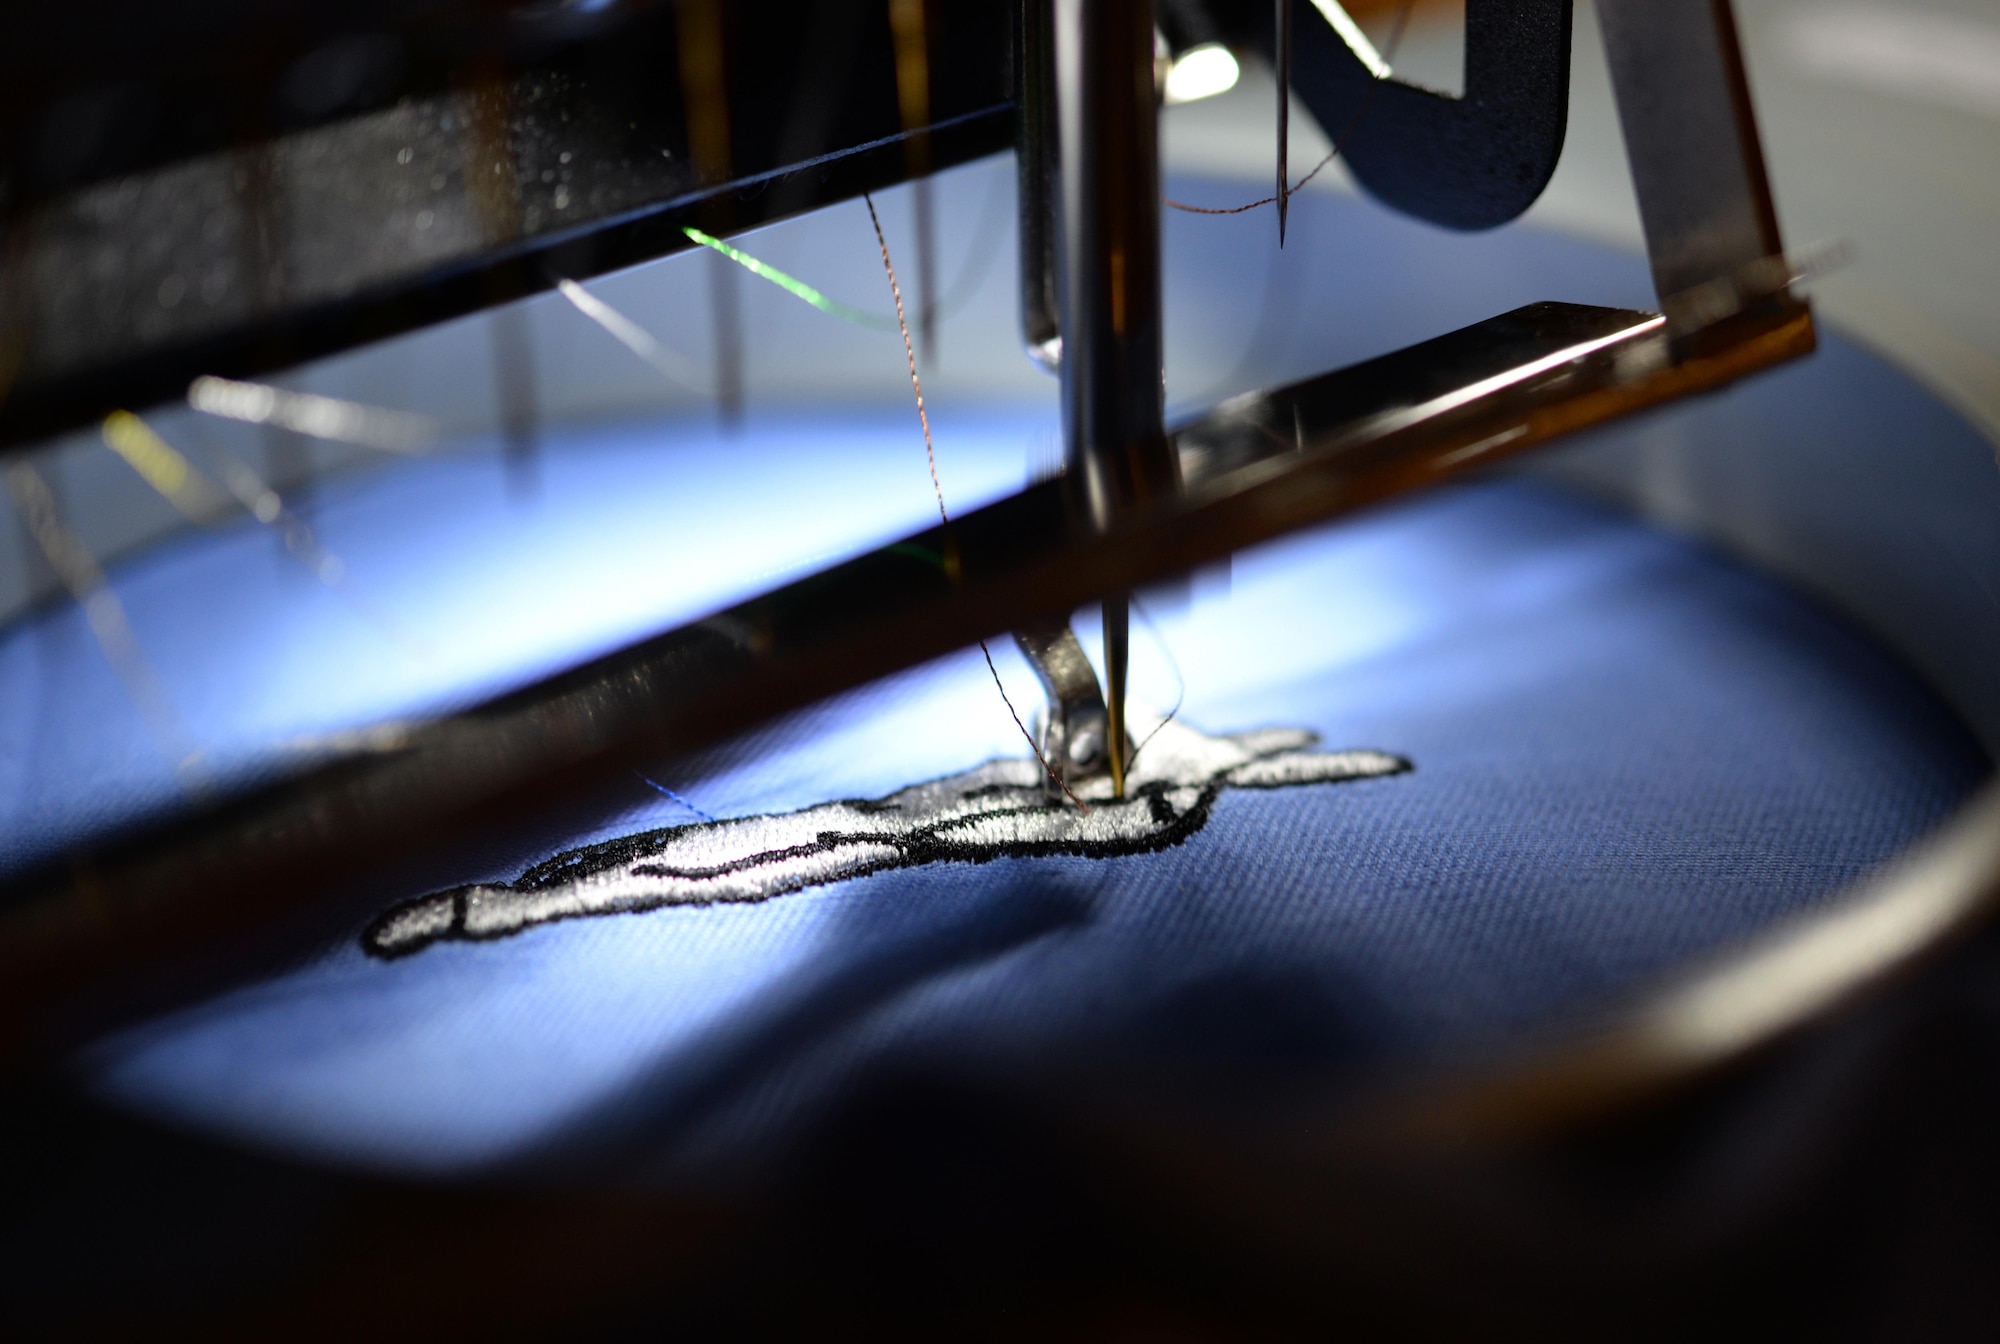 The Arts and Crafts Center’s embroidery machine sews an F-22 Raptor on a piece of cloth Feb. 2, 2016, Keesler Air Force Base, Miss. The embroidery shop is a newly opened segment of the Arts and Crafts Center that embroiders everything from baby clothes to name tapes. (U.S. Air Force photo by Airman 1st Class Travis Beihl)